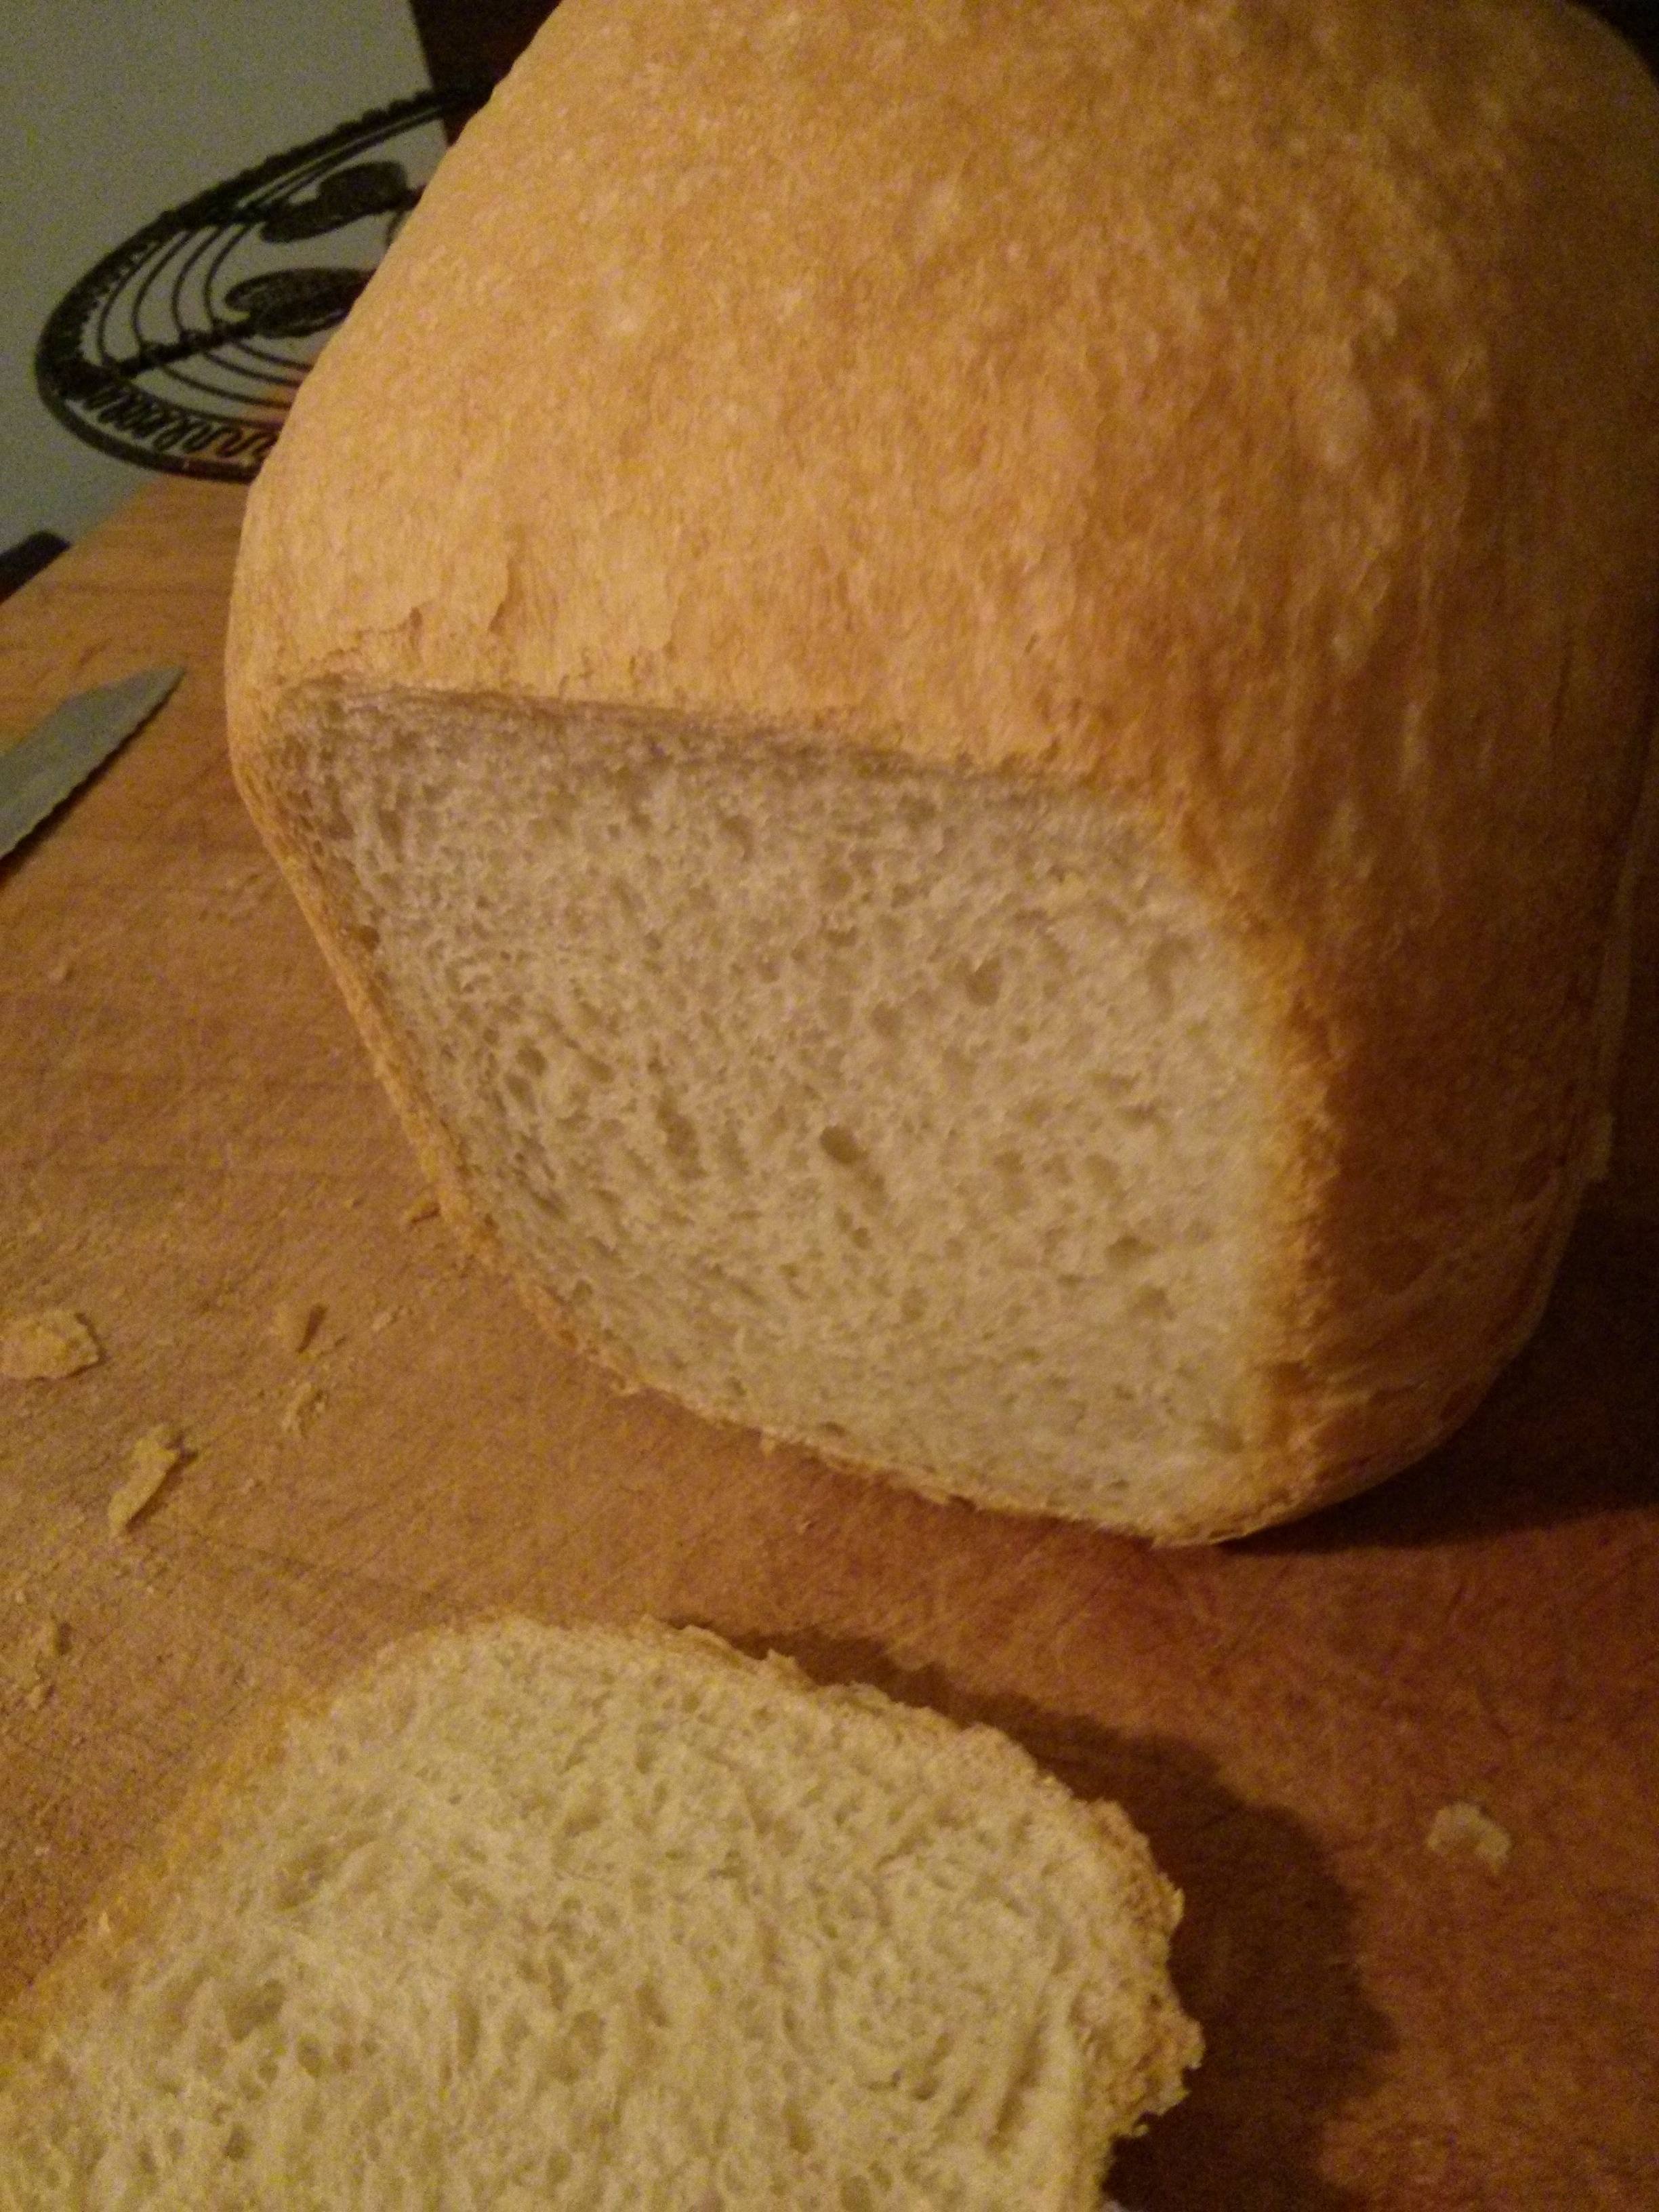 A white French loaf made with no salt, which looks similar to a 'normal' loaf